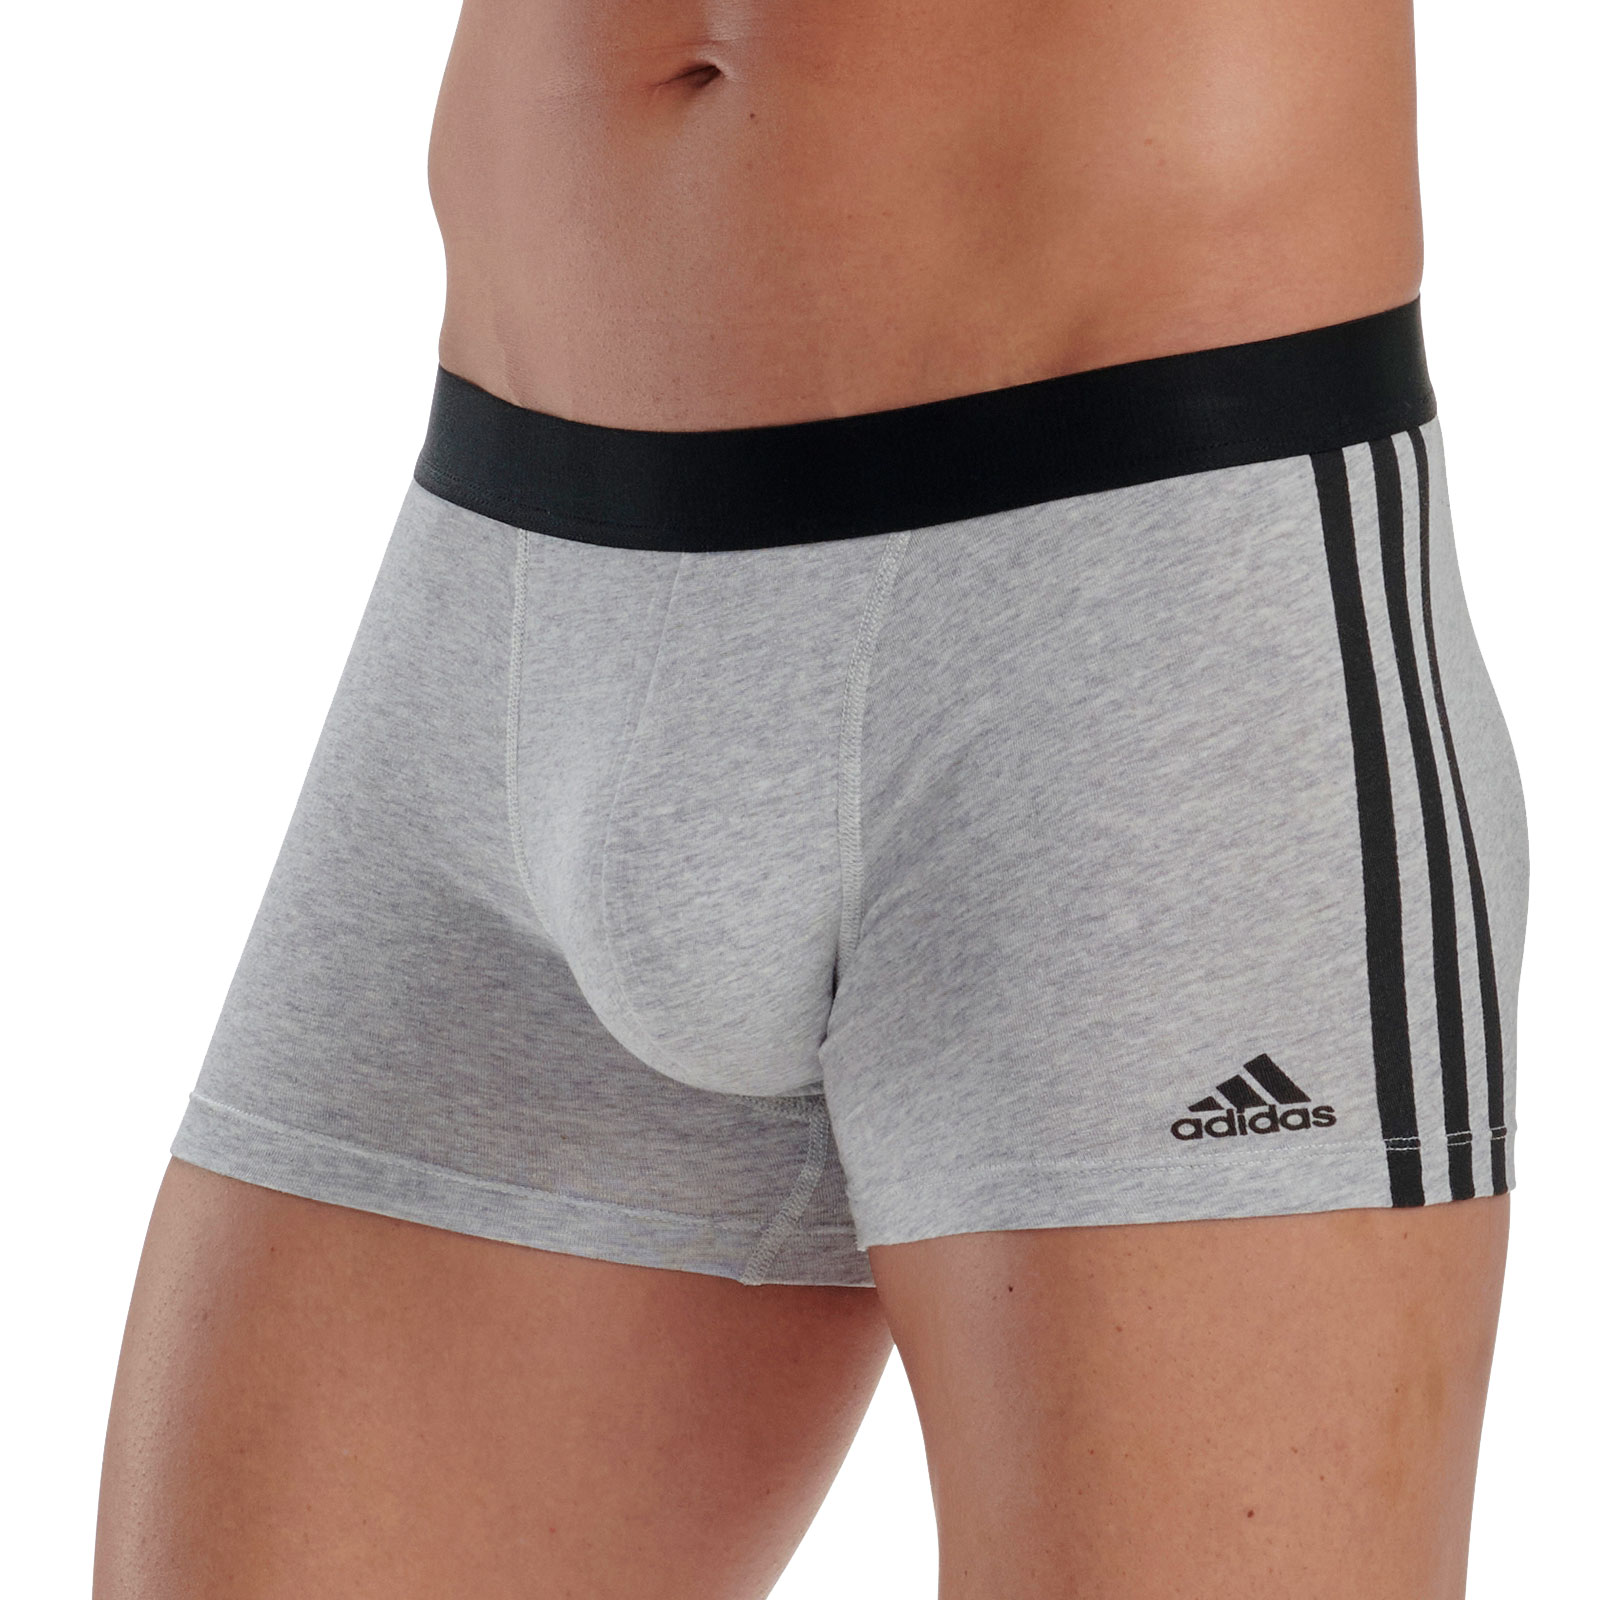 Adidas Trunk 3-Pack 4A2M08 Active Flex Cotton 3-Stripes - Yourunderwearstore